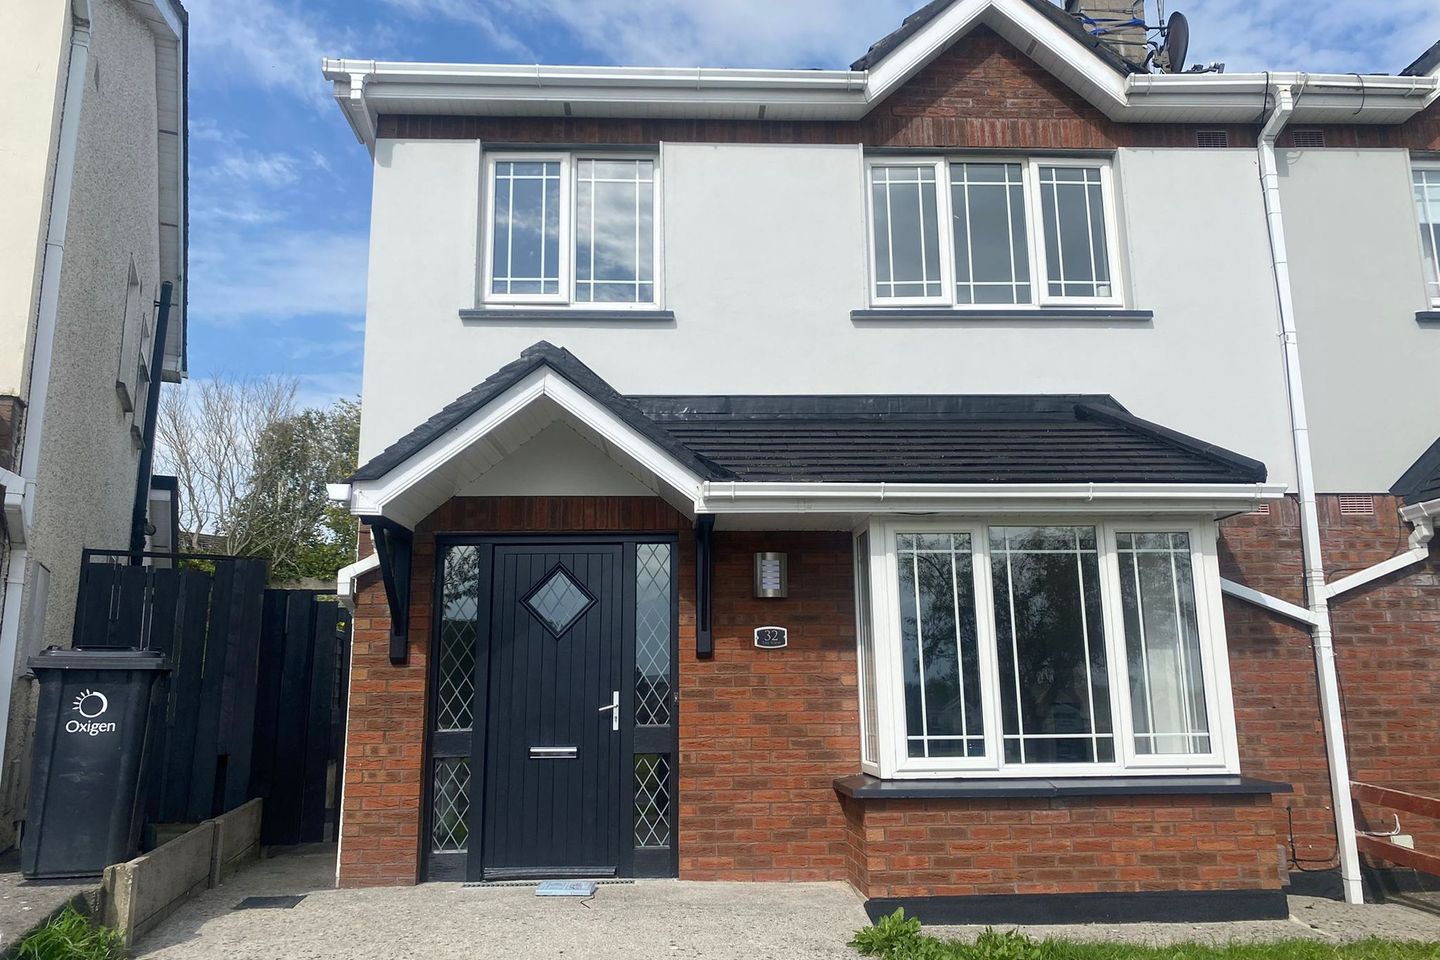 32 The View, Five Oaks Village, Drogheda, Co. Louth, A92FT6Y